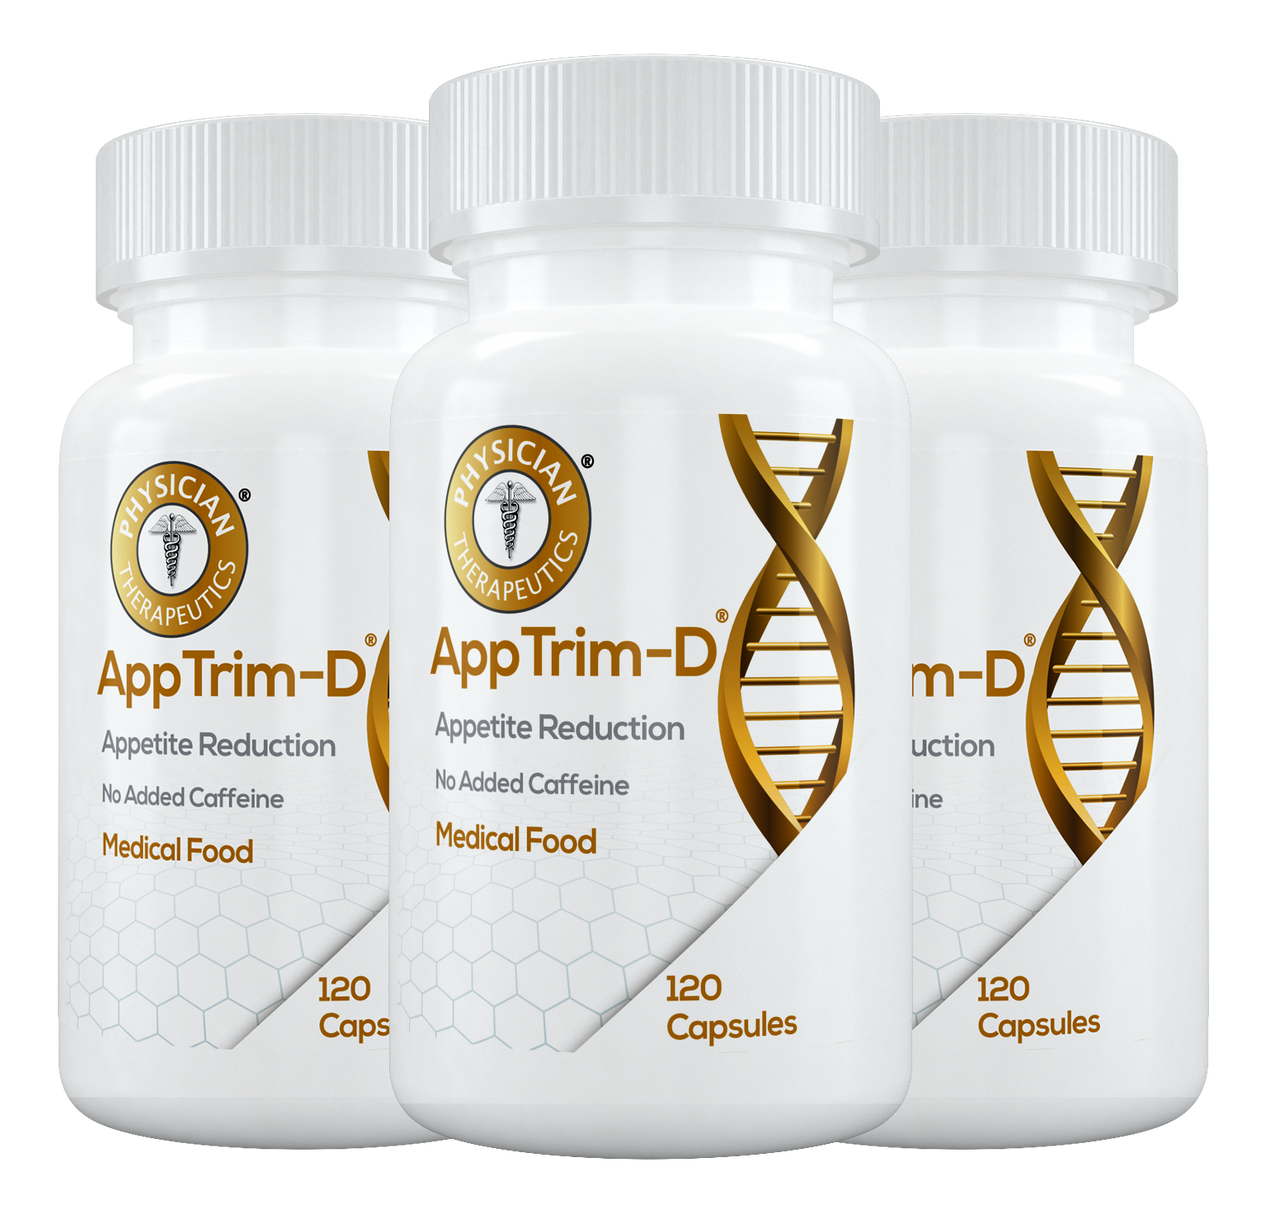 AppTrim-D® - Three Month Supply (360 capsules) 5% savings and FREE  shipping. - MedicalFoods.com